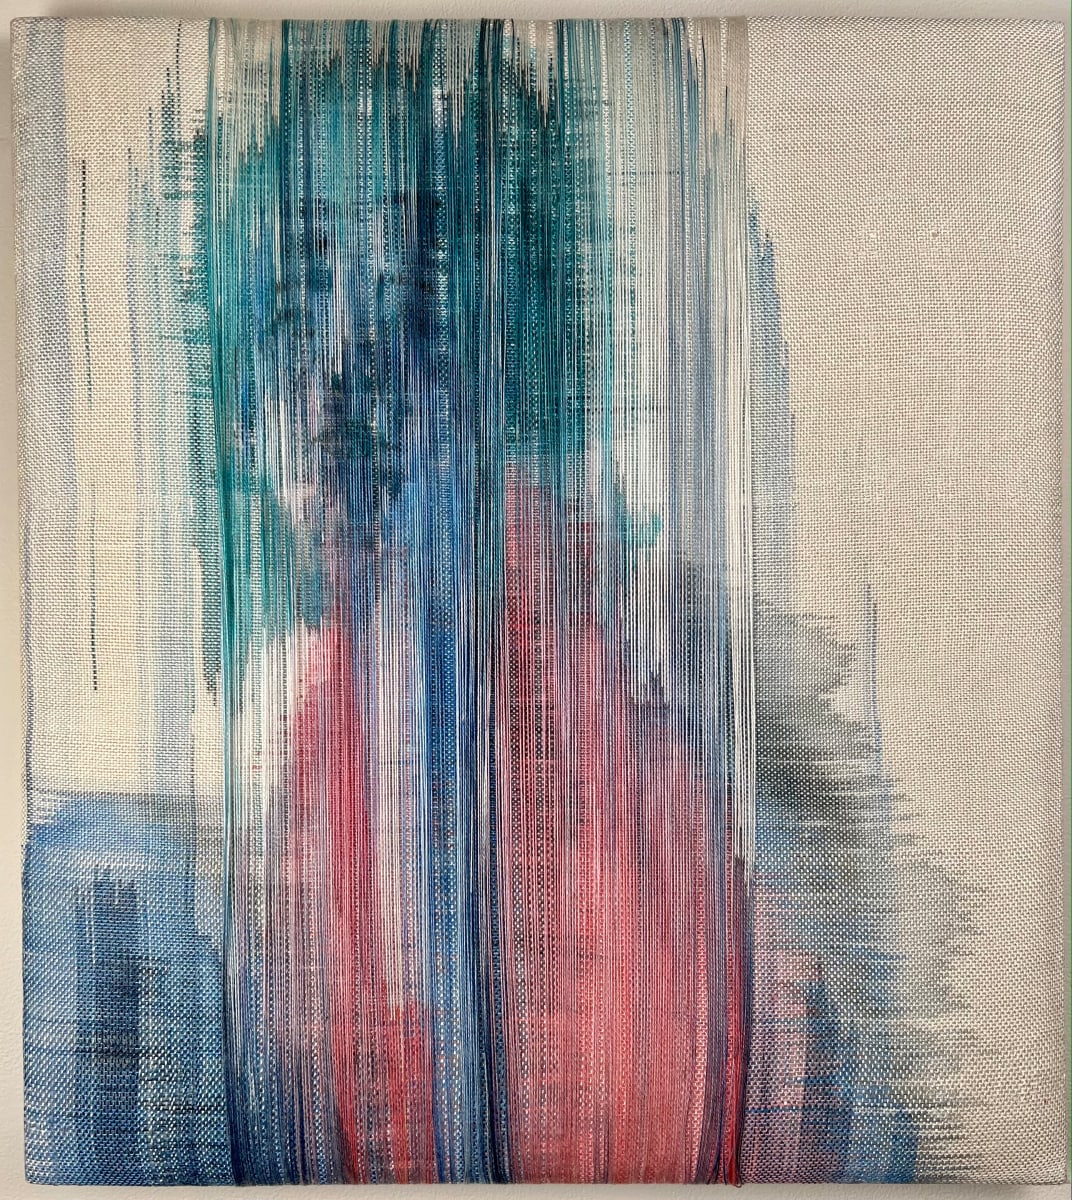 Shield by Melissa English Campbell  Image: Warp and weft painted double weaving of one solid layer and one layer of long floats. Portrait of young woman looking back over her shoulder.  Her face is blurred, doubled, her features distorted by the movement of the colors on the yarns.